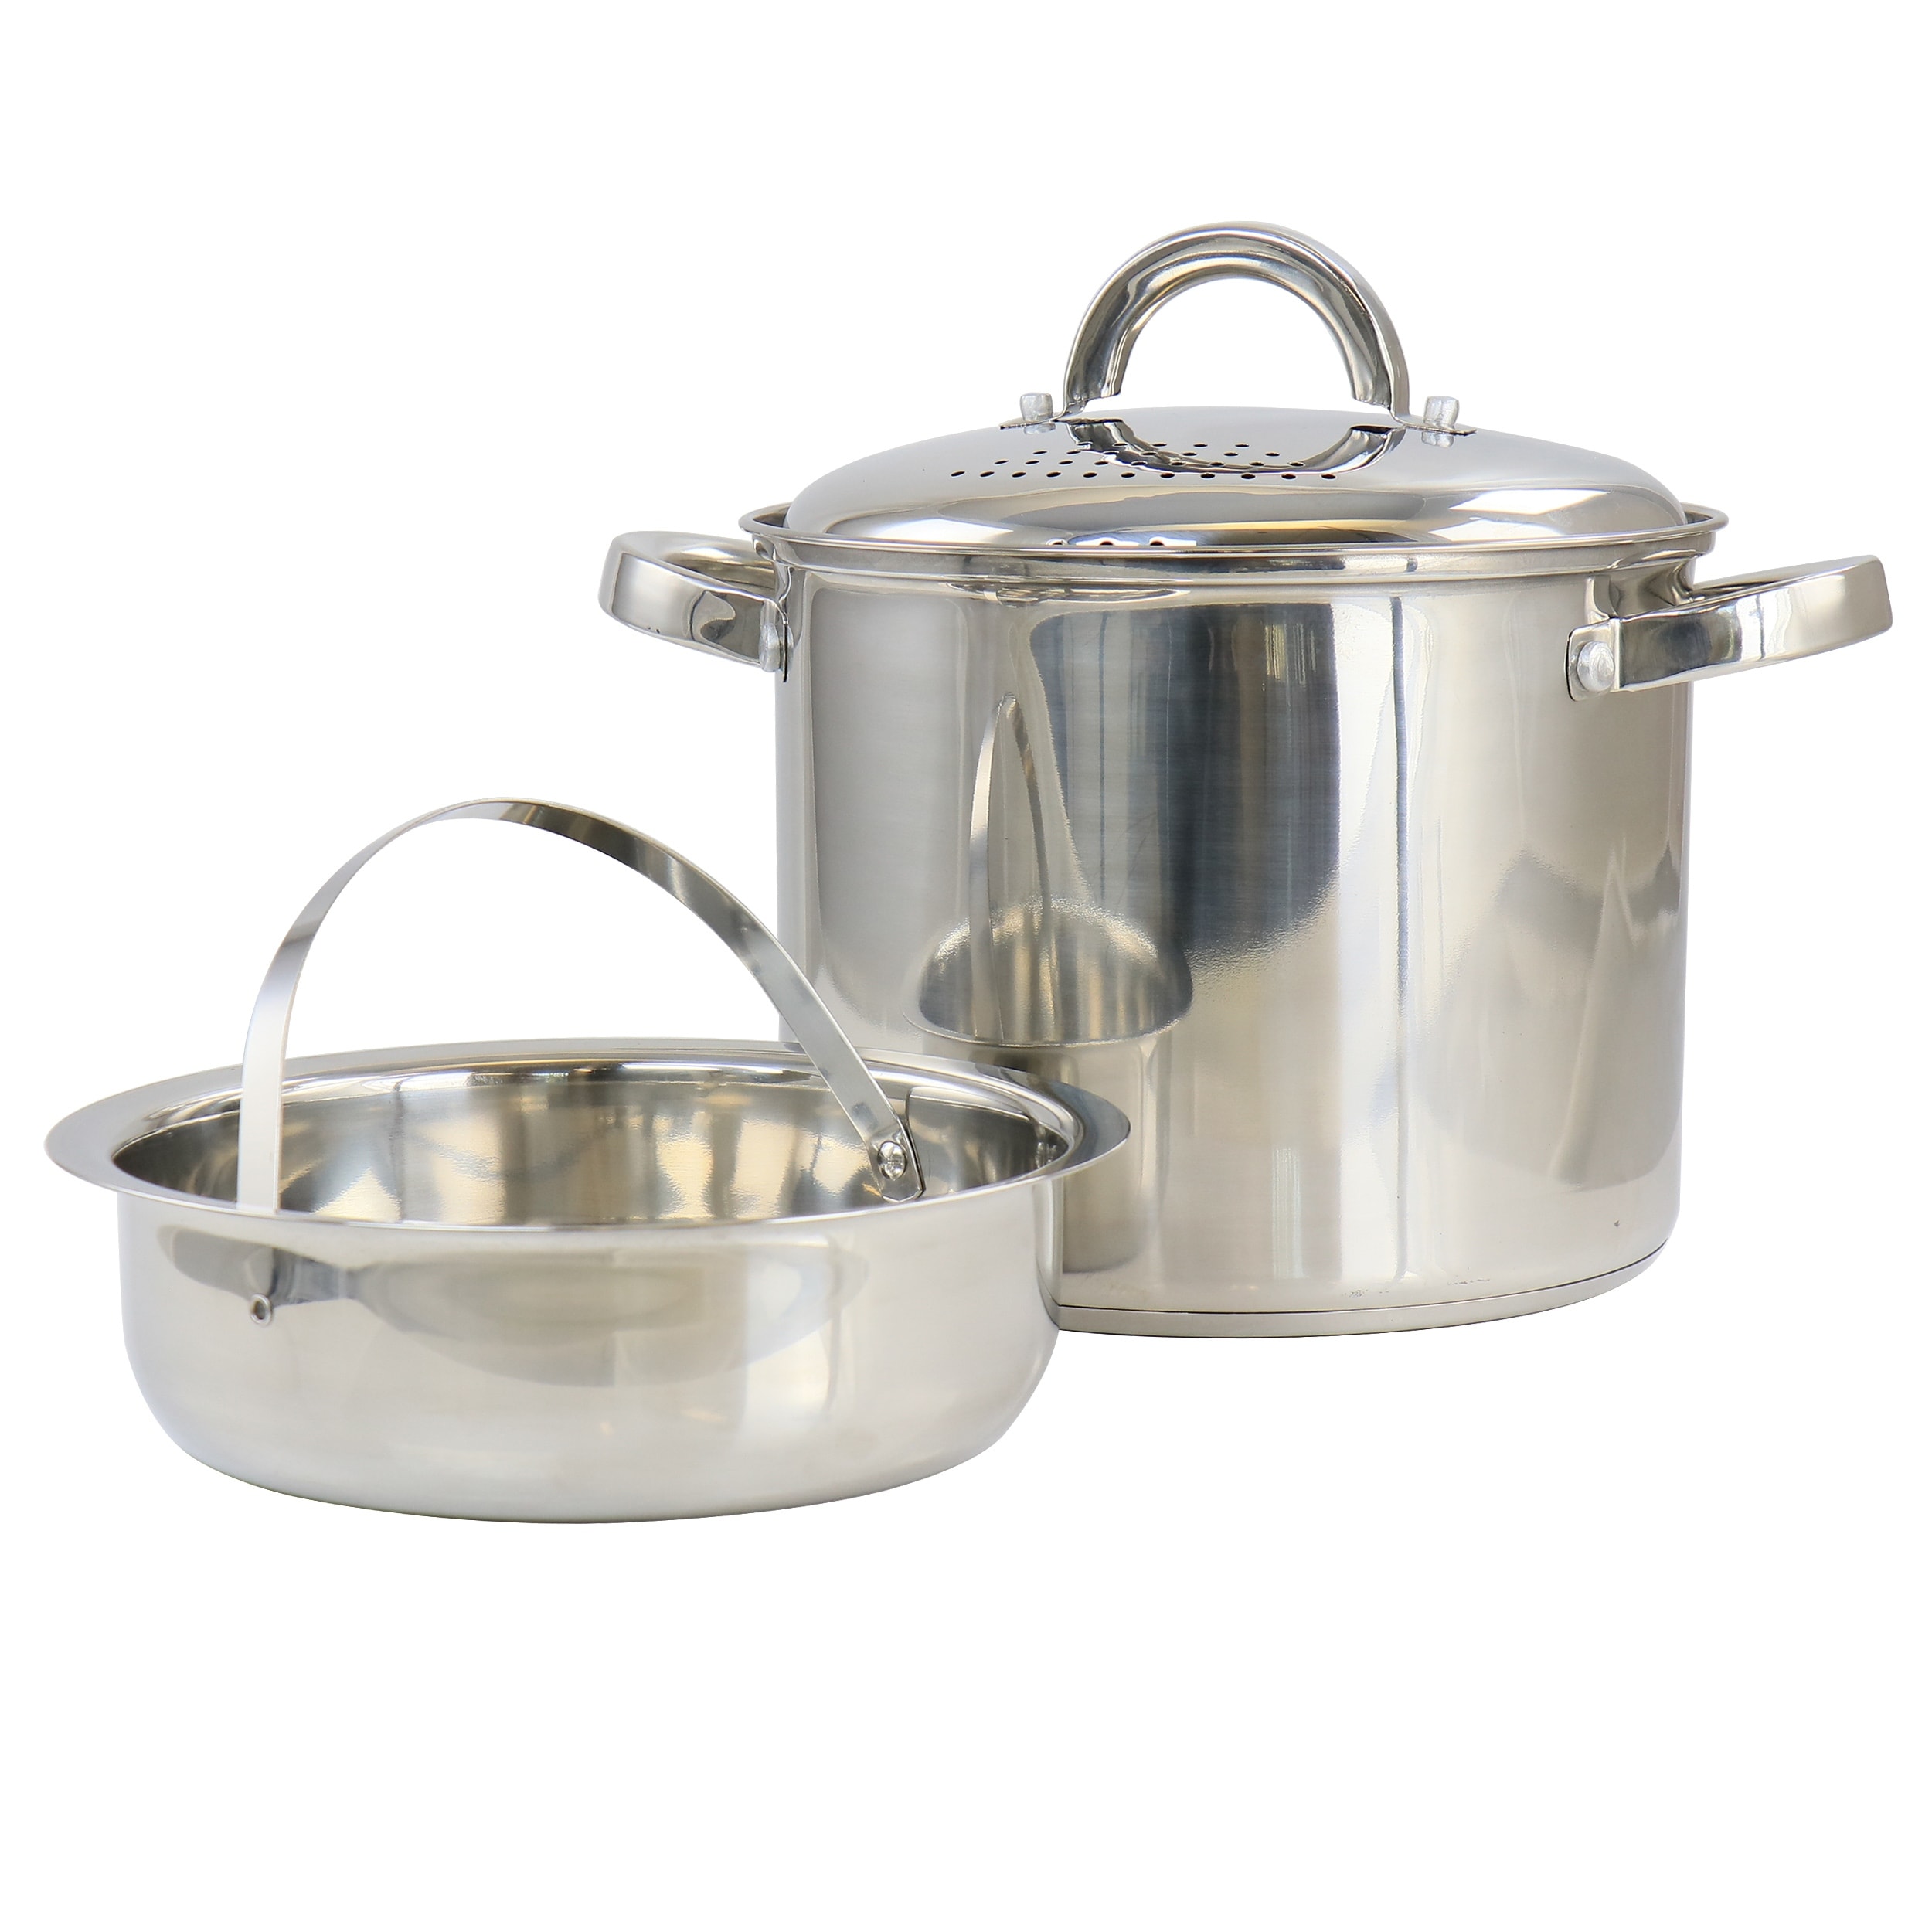 20 Cup Stainless Steel Pasta Pot with Strainer Lid and Steamer Insert - Silver